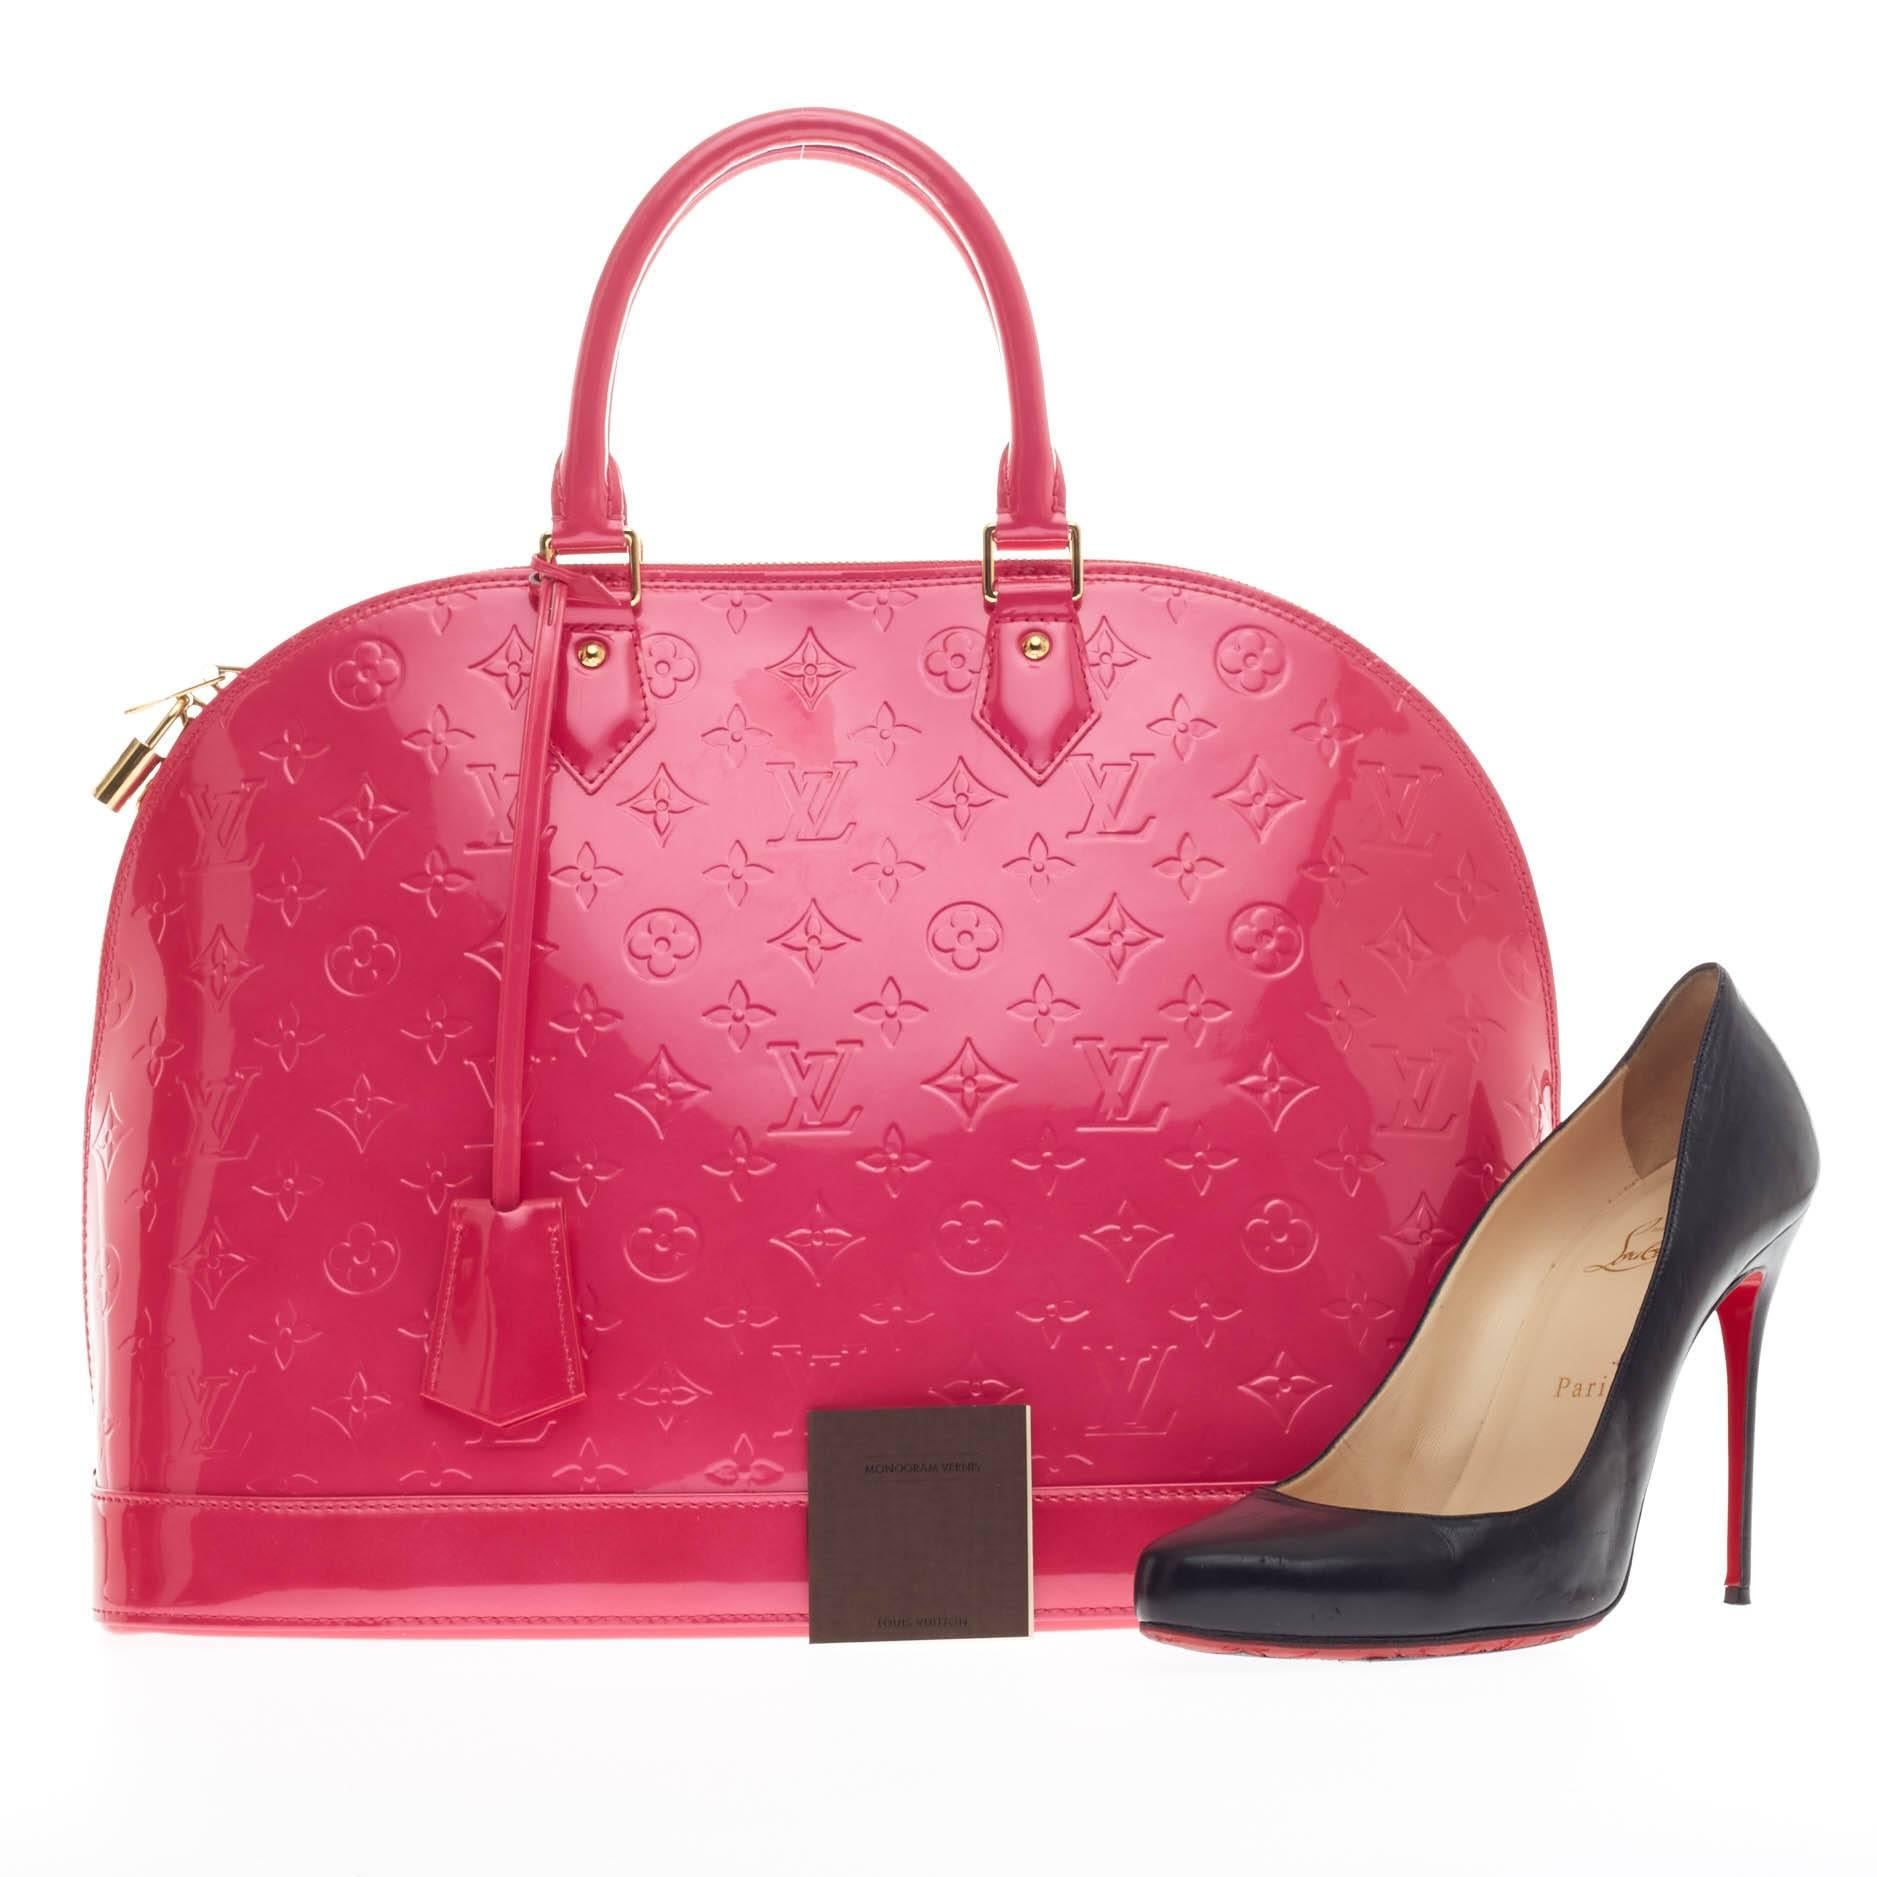 This authentic Louis Vuitton Alma Monogram Vernis GM is a fresh and elegant spin on a classic style that is perfect for all seasons. Crafted from Louis Vuitton's glossy vernis patent leather in beautiful rose pop pink, this dome-shaped satchel